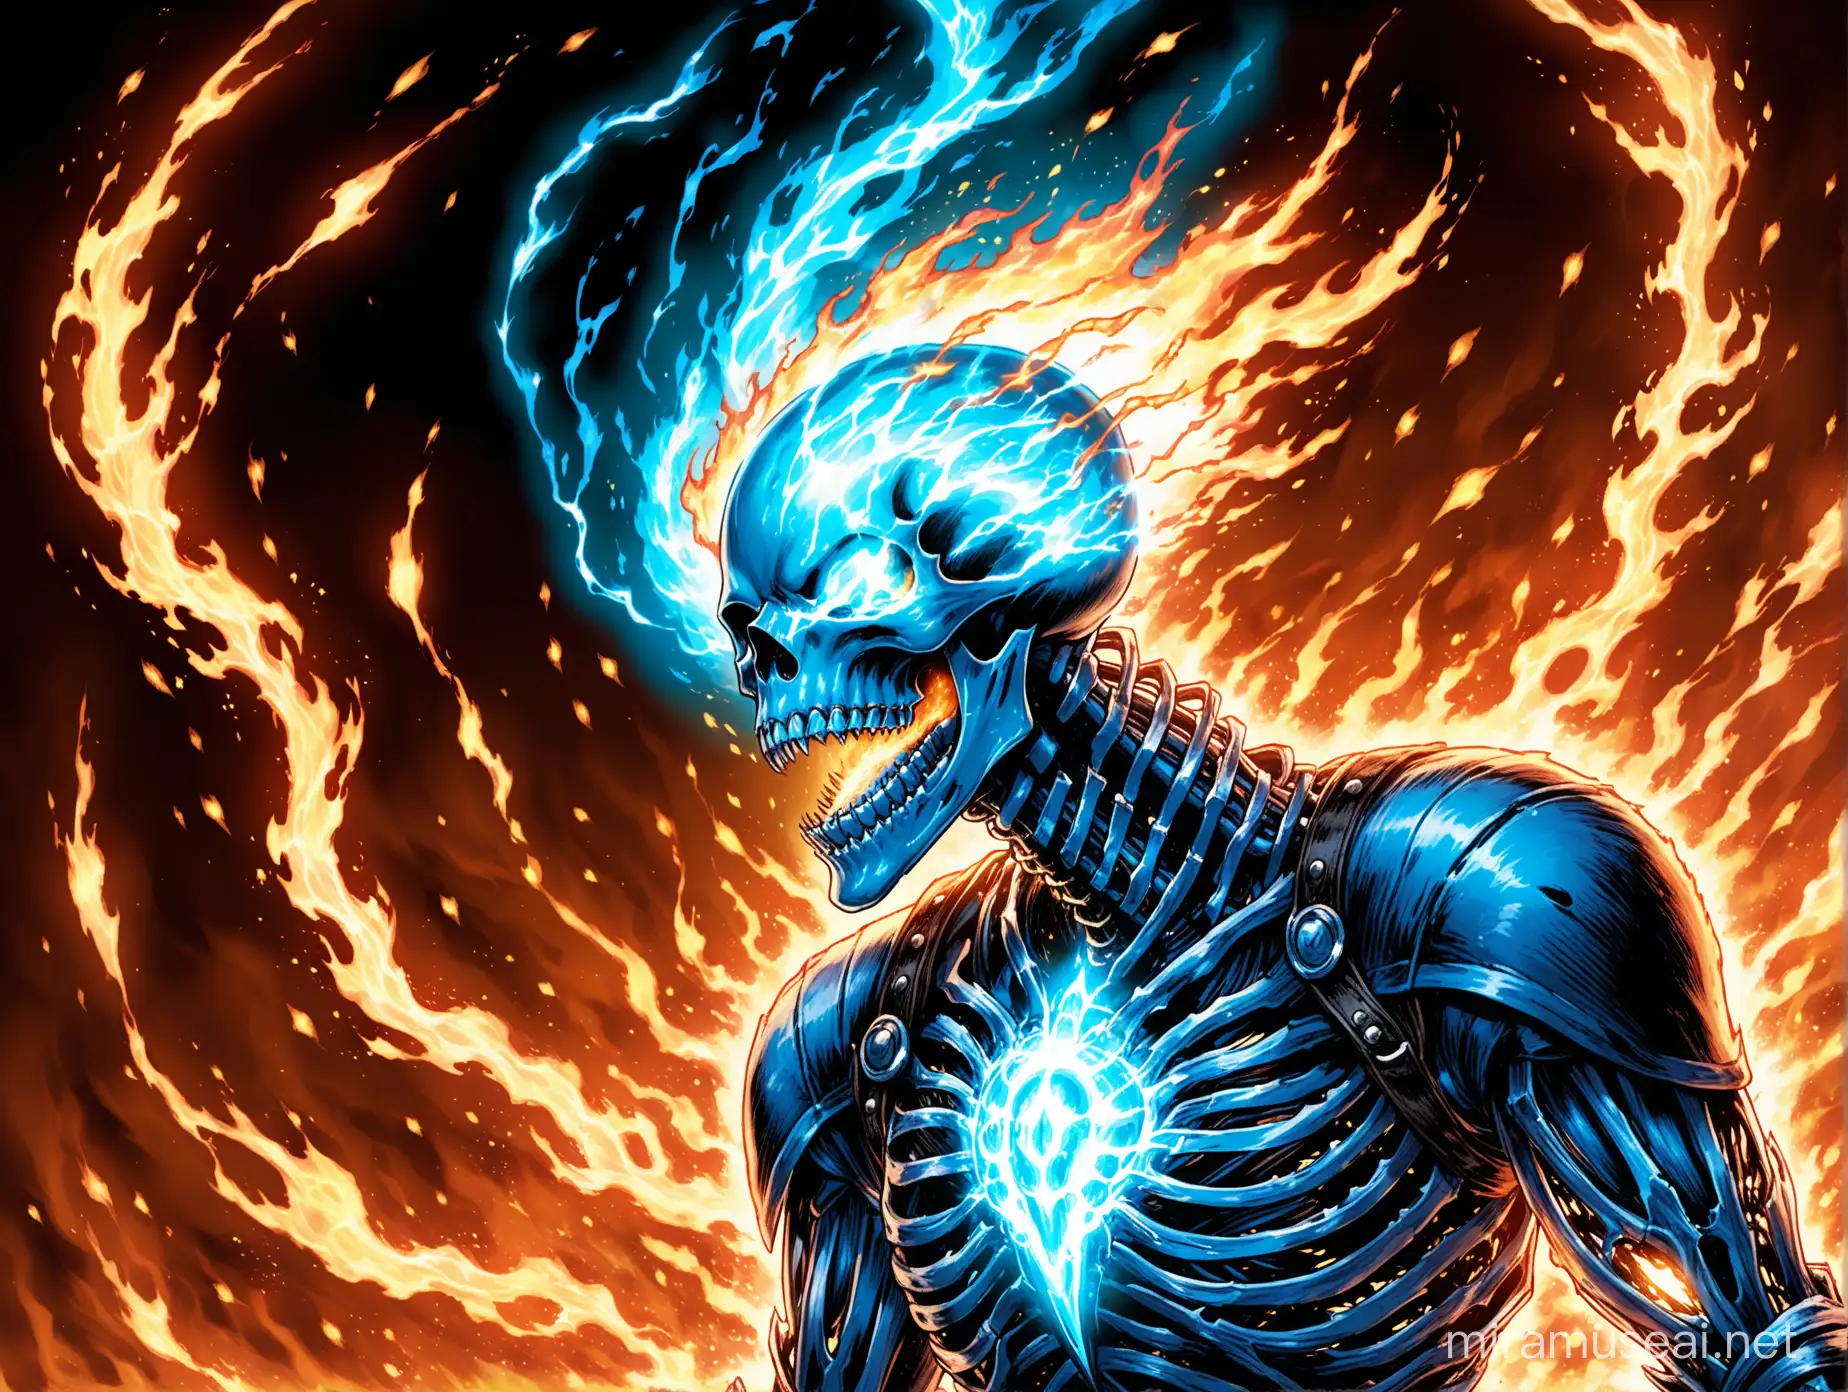 Ethereal CyberSkeleton Spectral Rider Amidst Blue Fire and Electric Surge